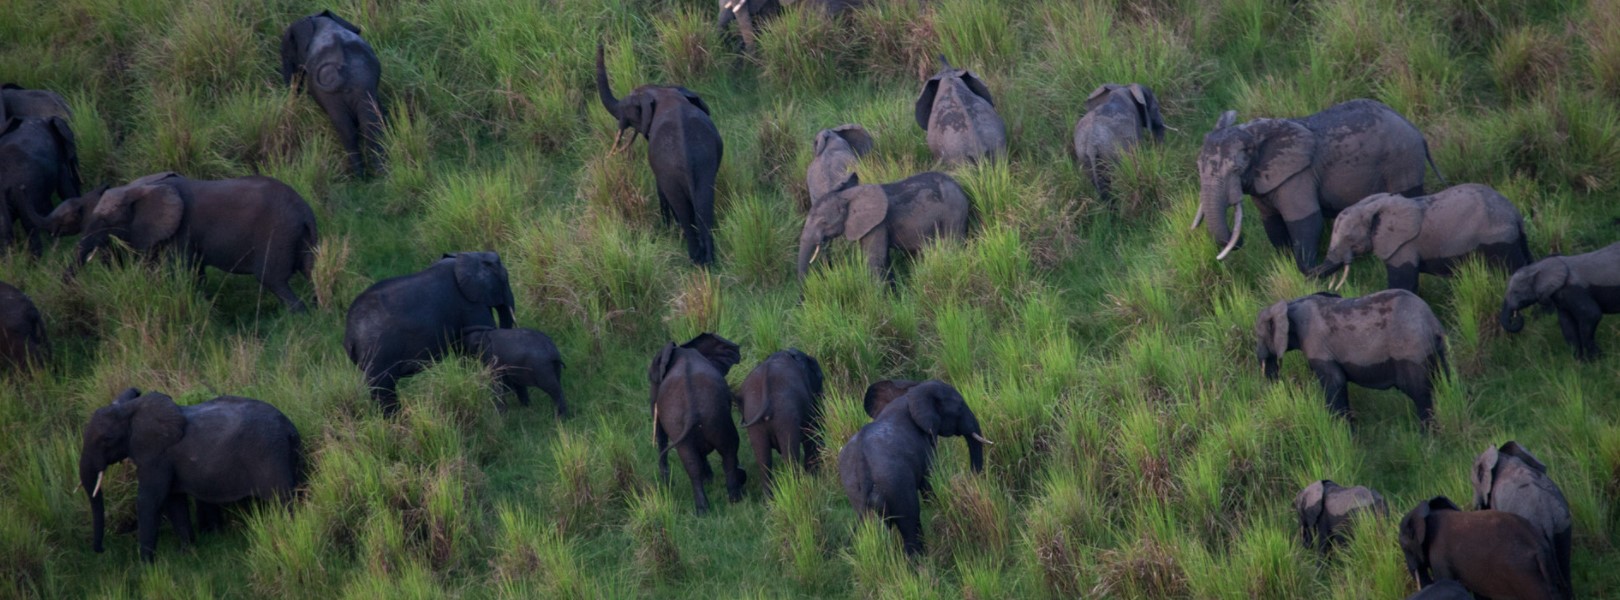 Garamba National Park is among the oldest national parks in Africa